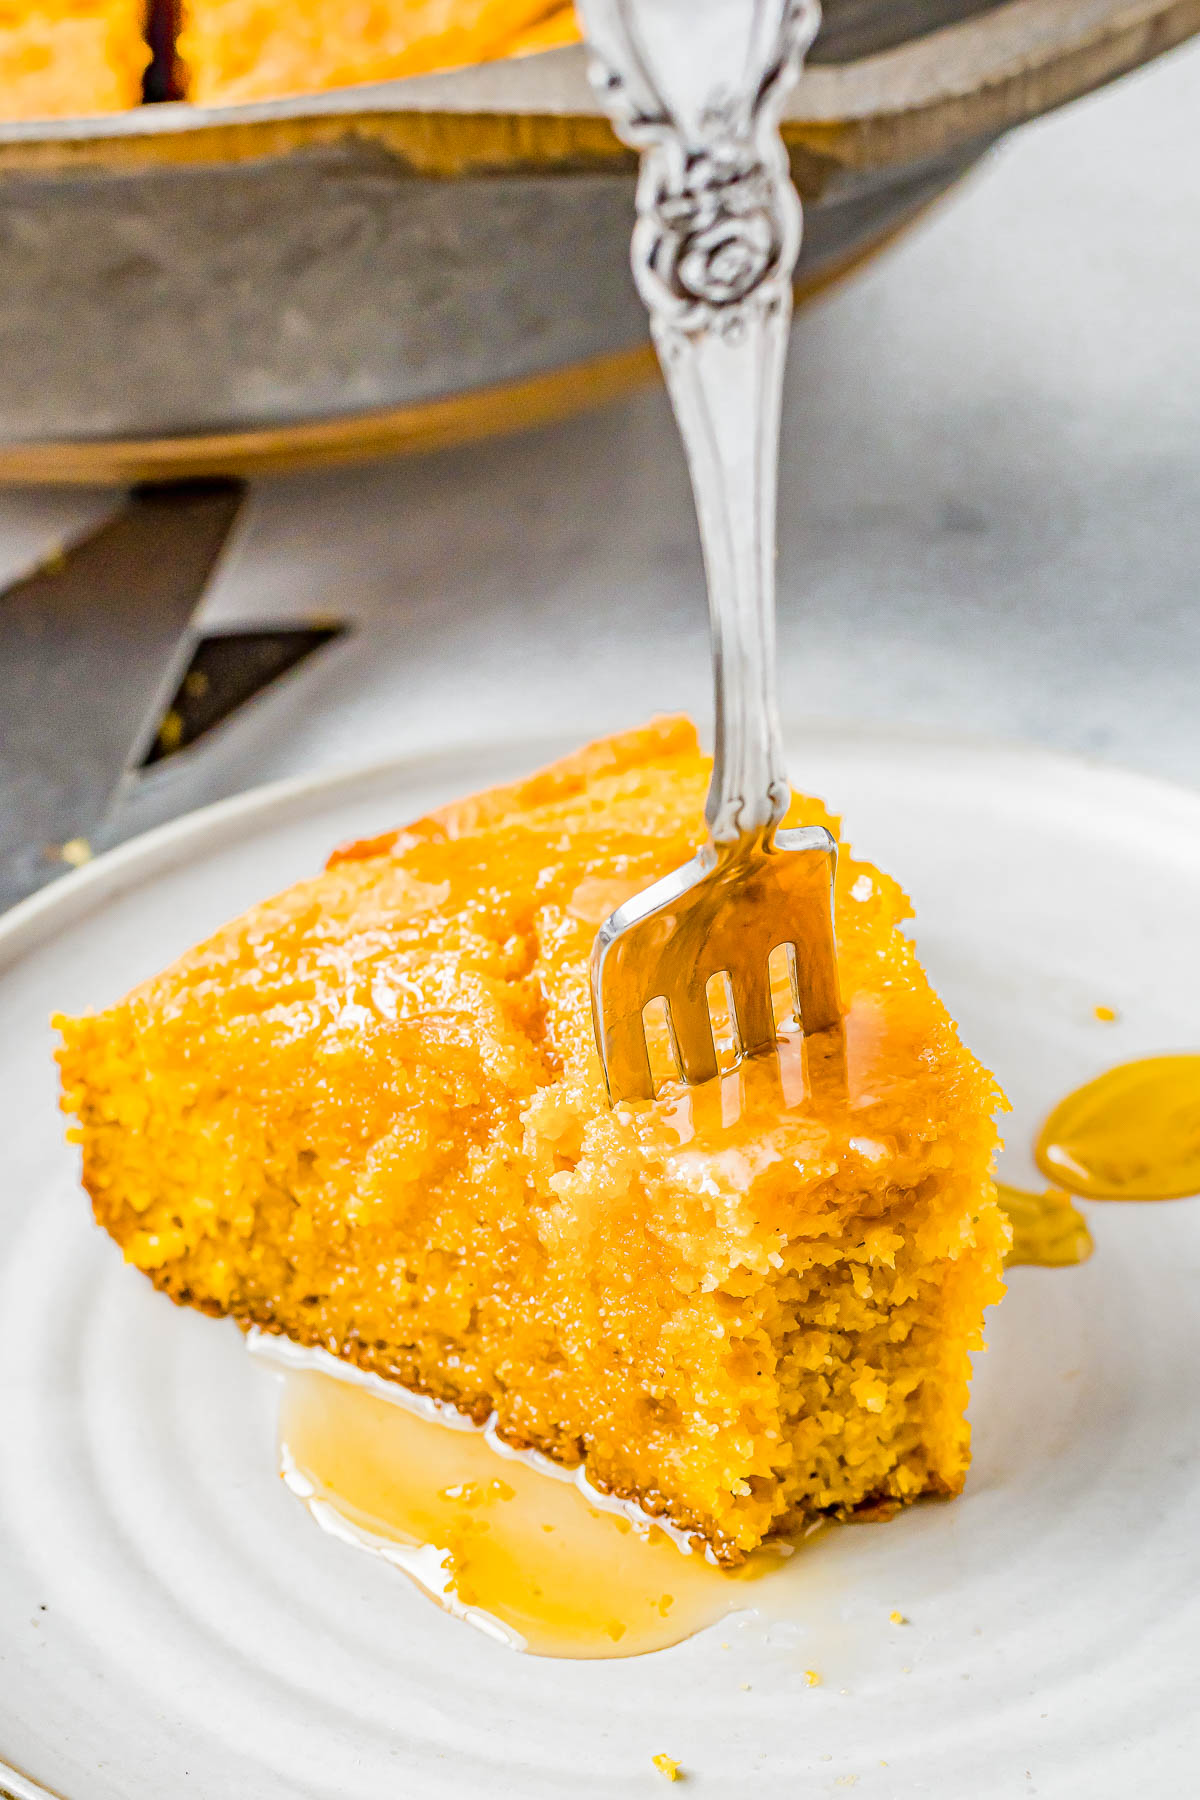 Sweet Potato Cornbread - Homemade cornbread just got better because it's jazzed up with mashed sweet potatoes, brown sugar, and pumpkin pie spice! Thanks to the natural moisture from sweet potatoes and the addition of buttermilk, it's so moist and flavorful! Whether you're looking for a fall-inspired comfort food recipe or a new Thanksgiving or Christmas side dish, this cornbread is EASY and will become a new family FAVORITE!